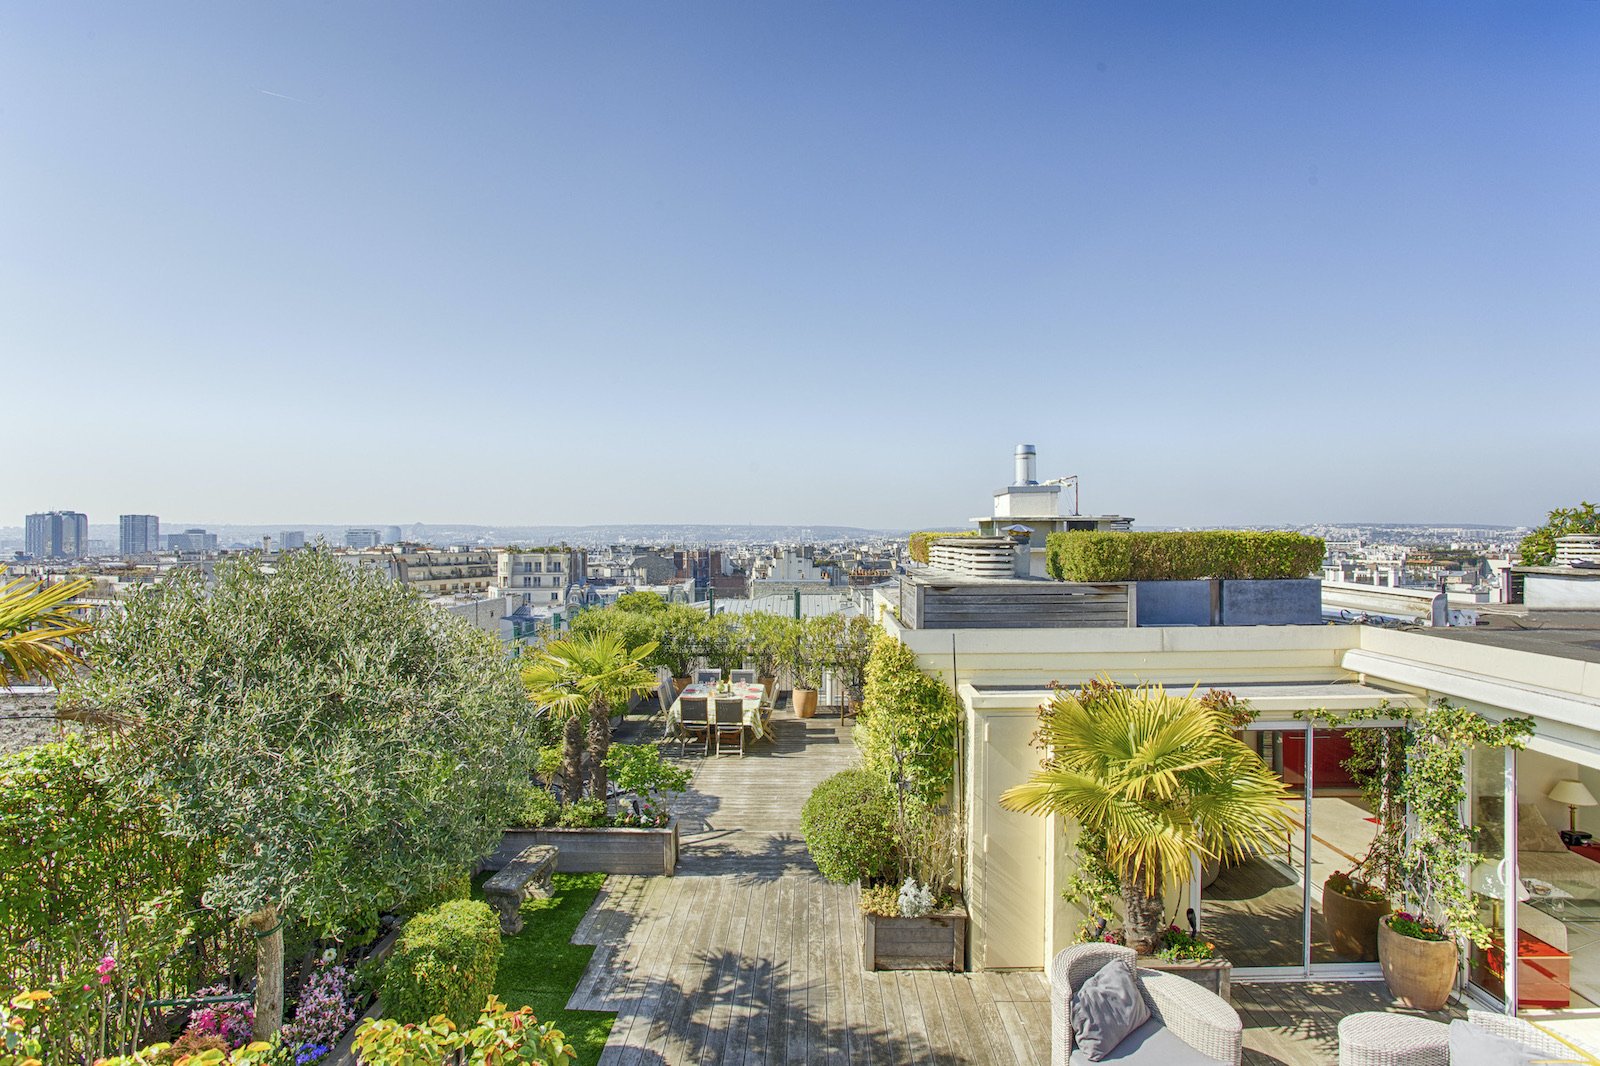 Exceptional apartment in the center of Paris with rooftop view of the Eiffel Tower